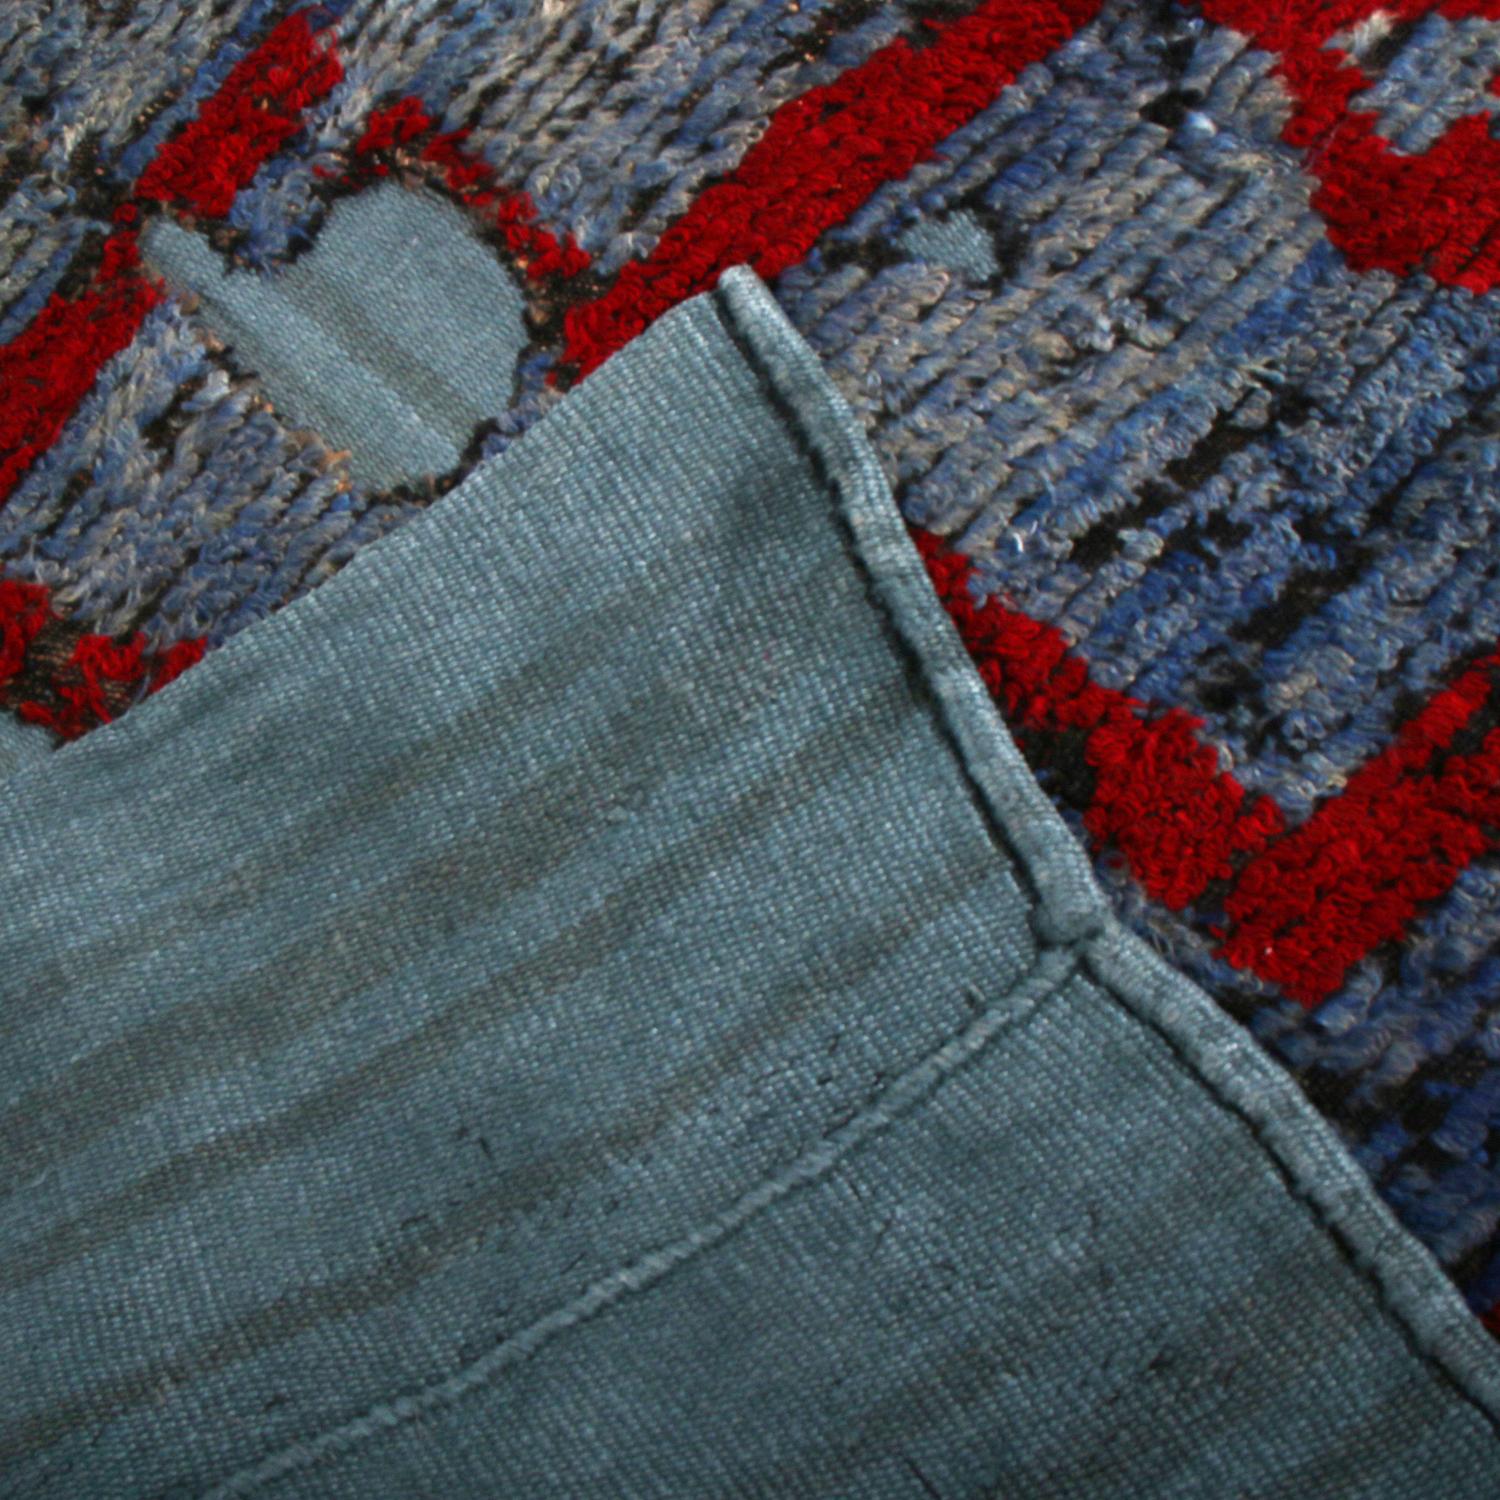 Rug & Kilim's Distressed High-Low Square Kilim, Blue, Red Geometric Pattern In New Condition For Sale In Long Island City, NY